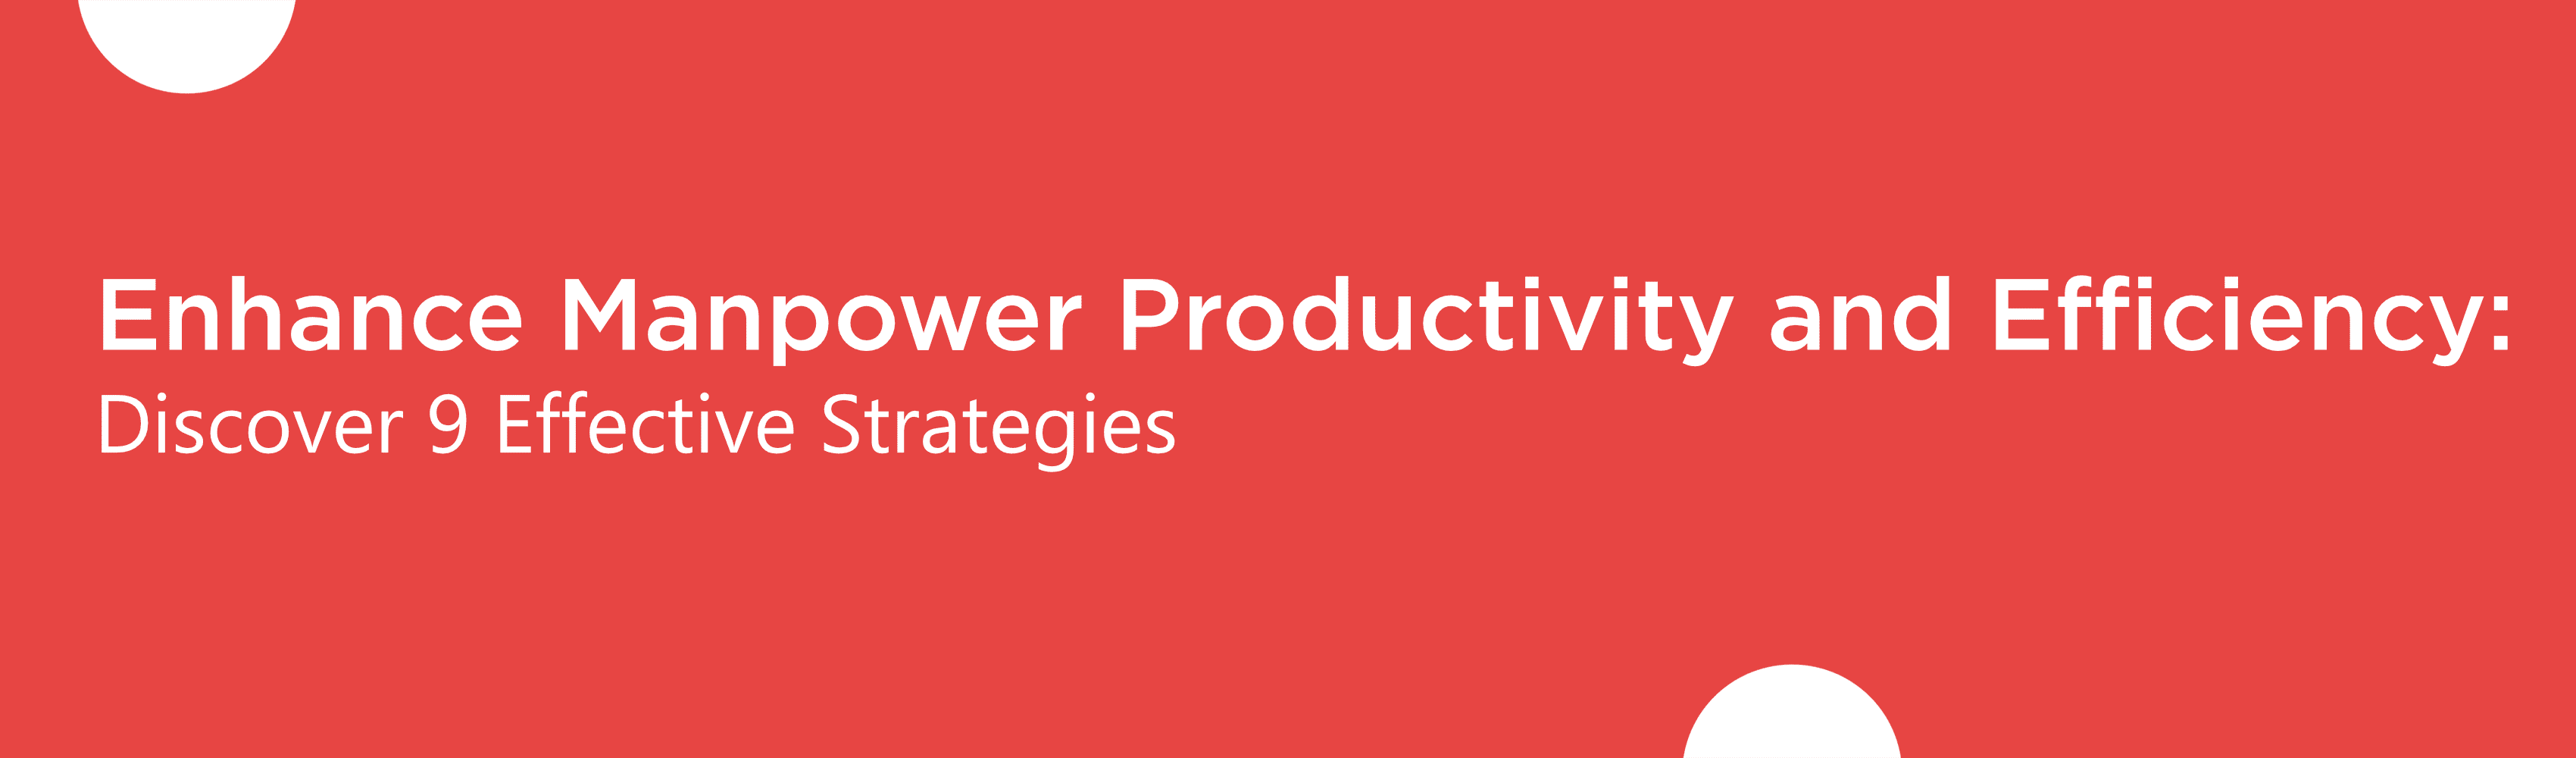 Enhance Manpower Productivity and Efficiency: Discover 9 Effective Strategies